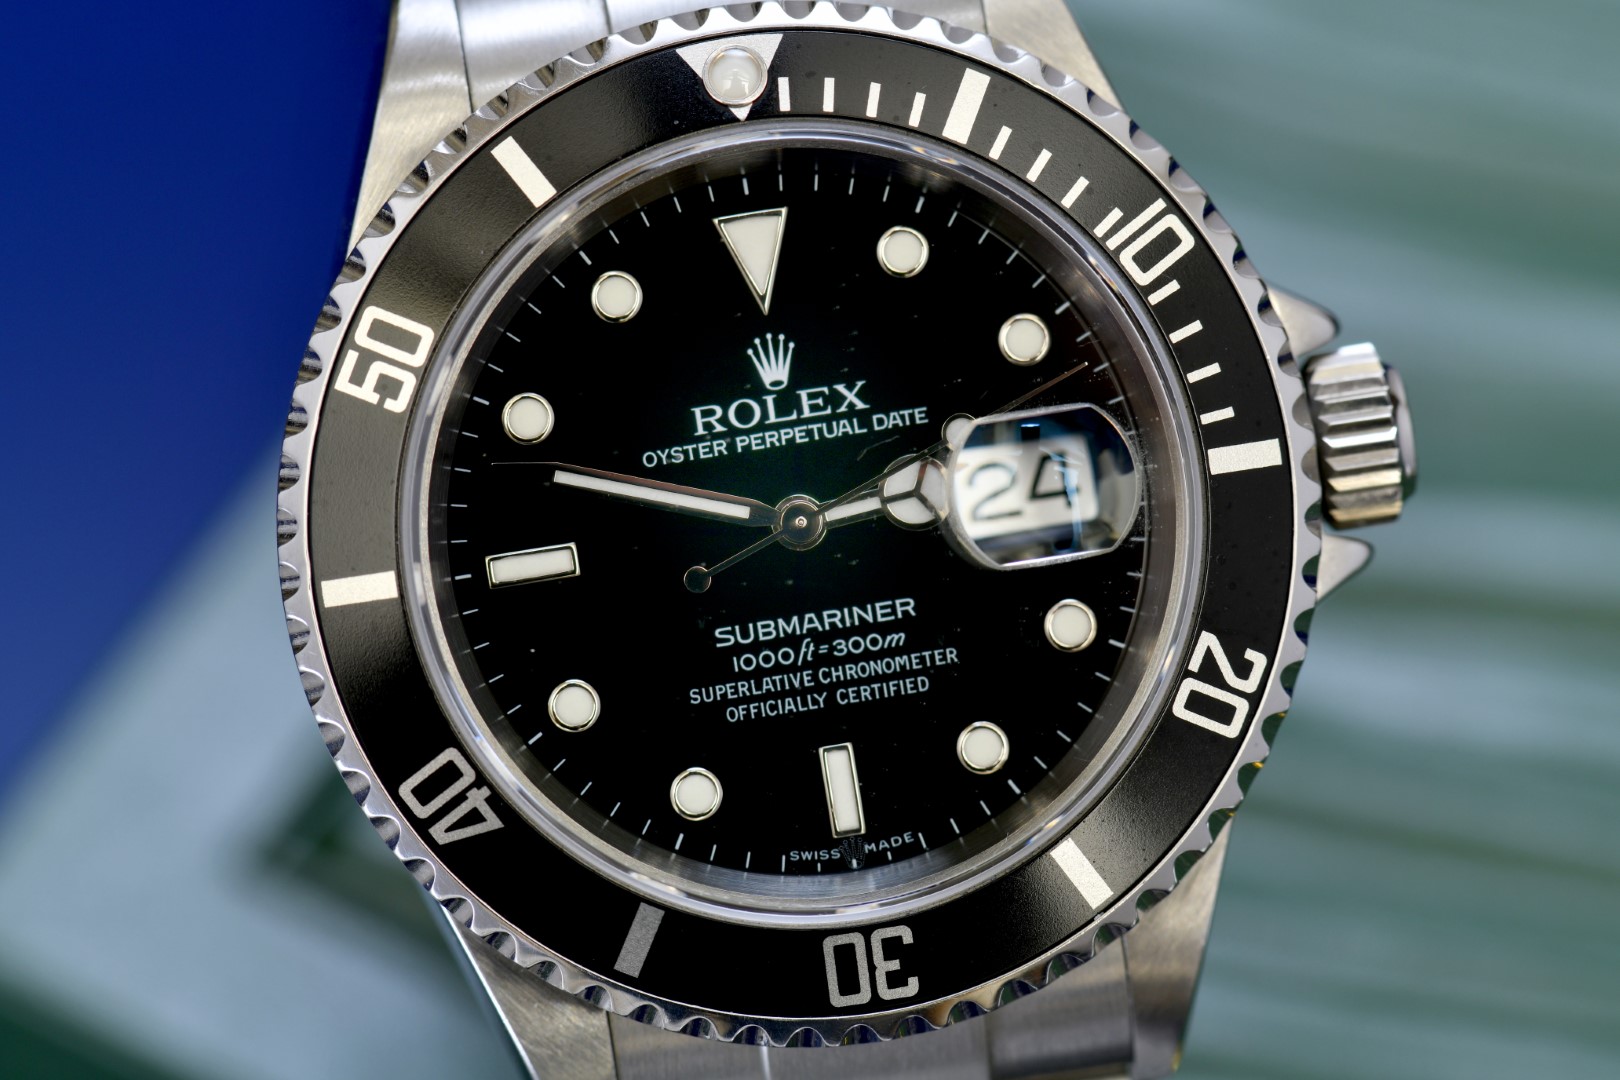 Rolex Oyster Perpetual Date Submariner gentleman's automatic wristwatch ref. 116610 with date - Image 2 of 8